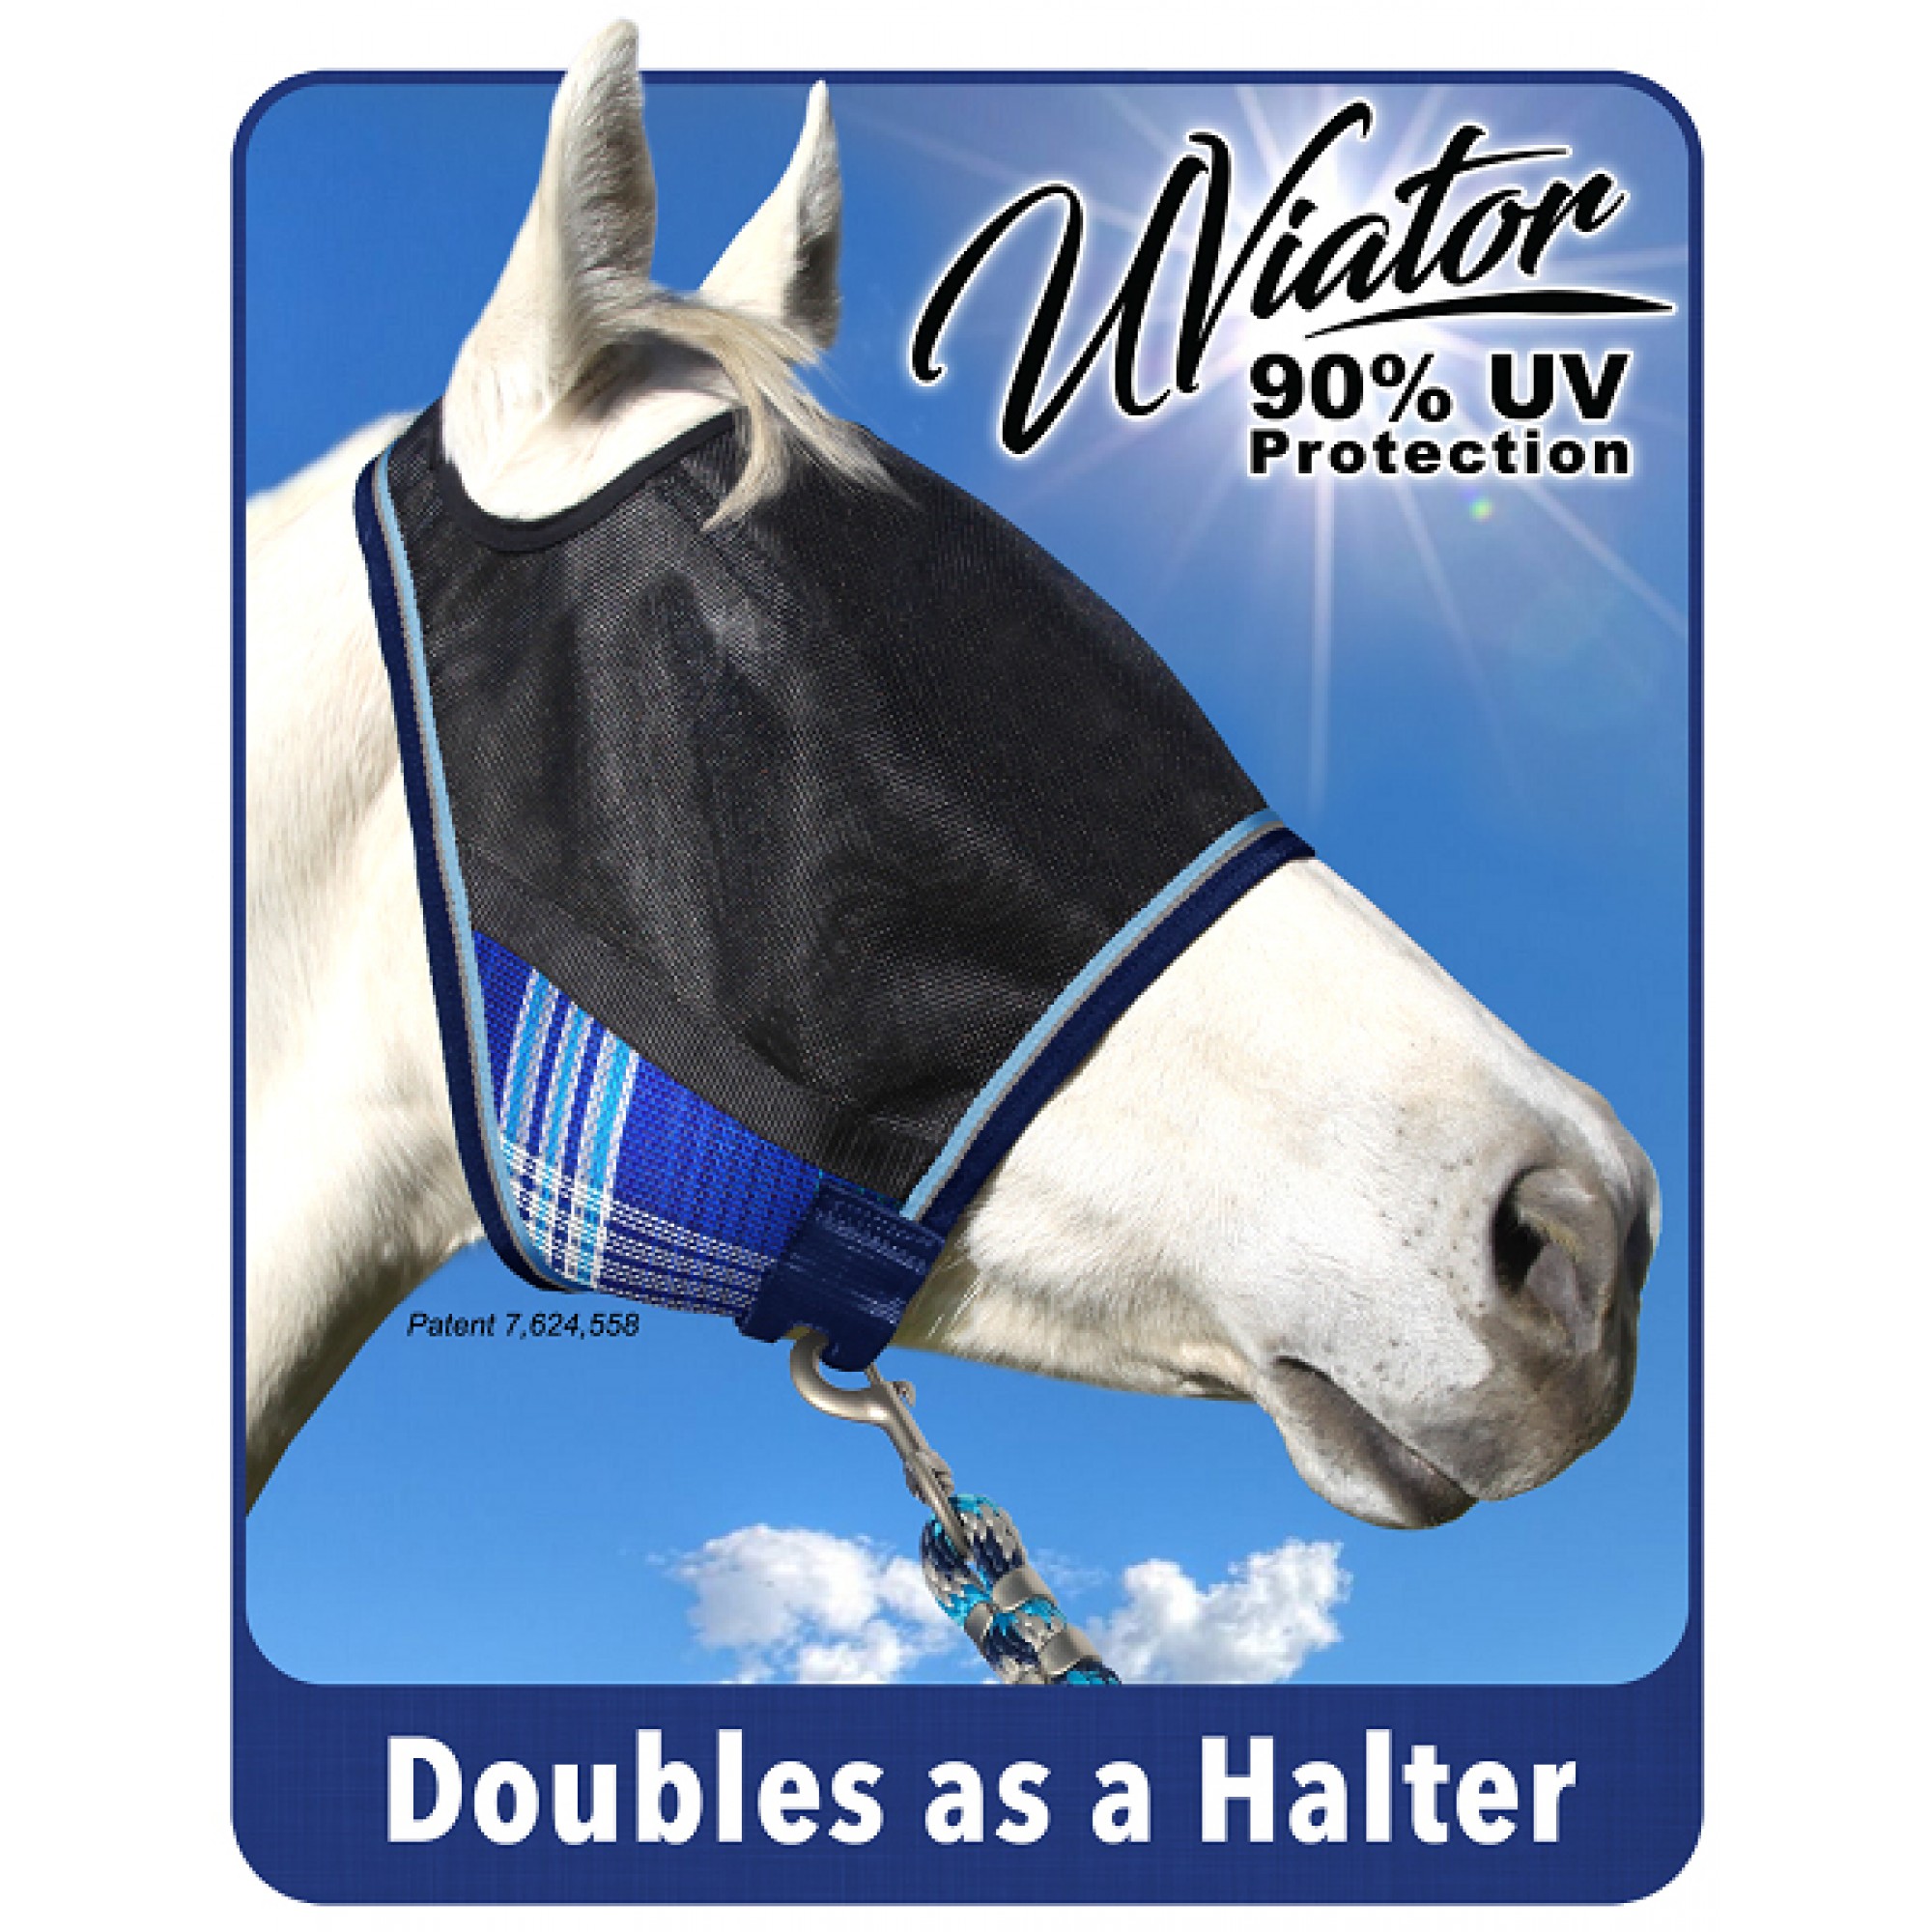 Double Locking CatchMask Fasteners Newest UV Solar Screen Protection with a 90% UV Rating Kensington UViator Protective Fly Mask Non Heat Transferring Fabric